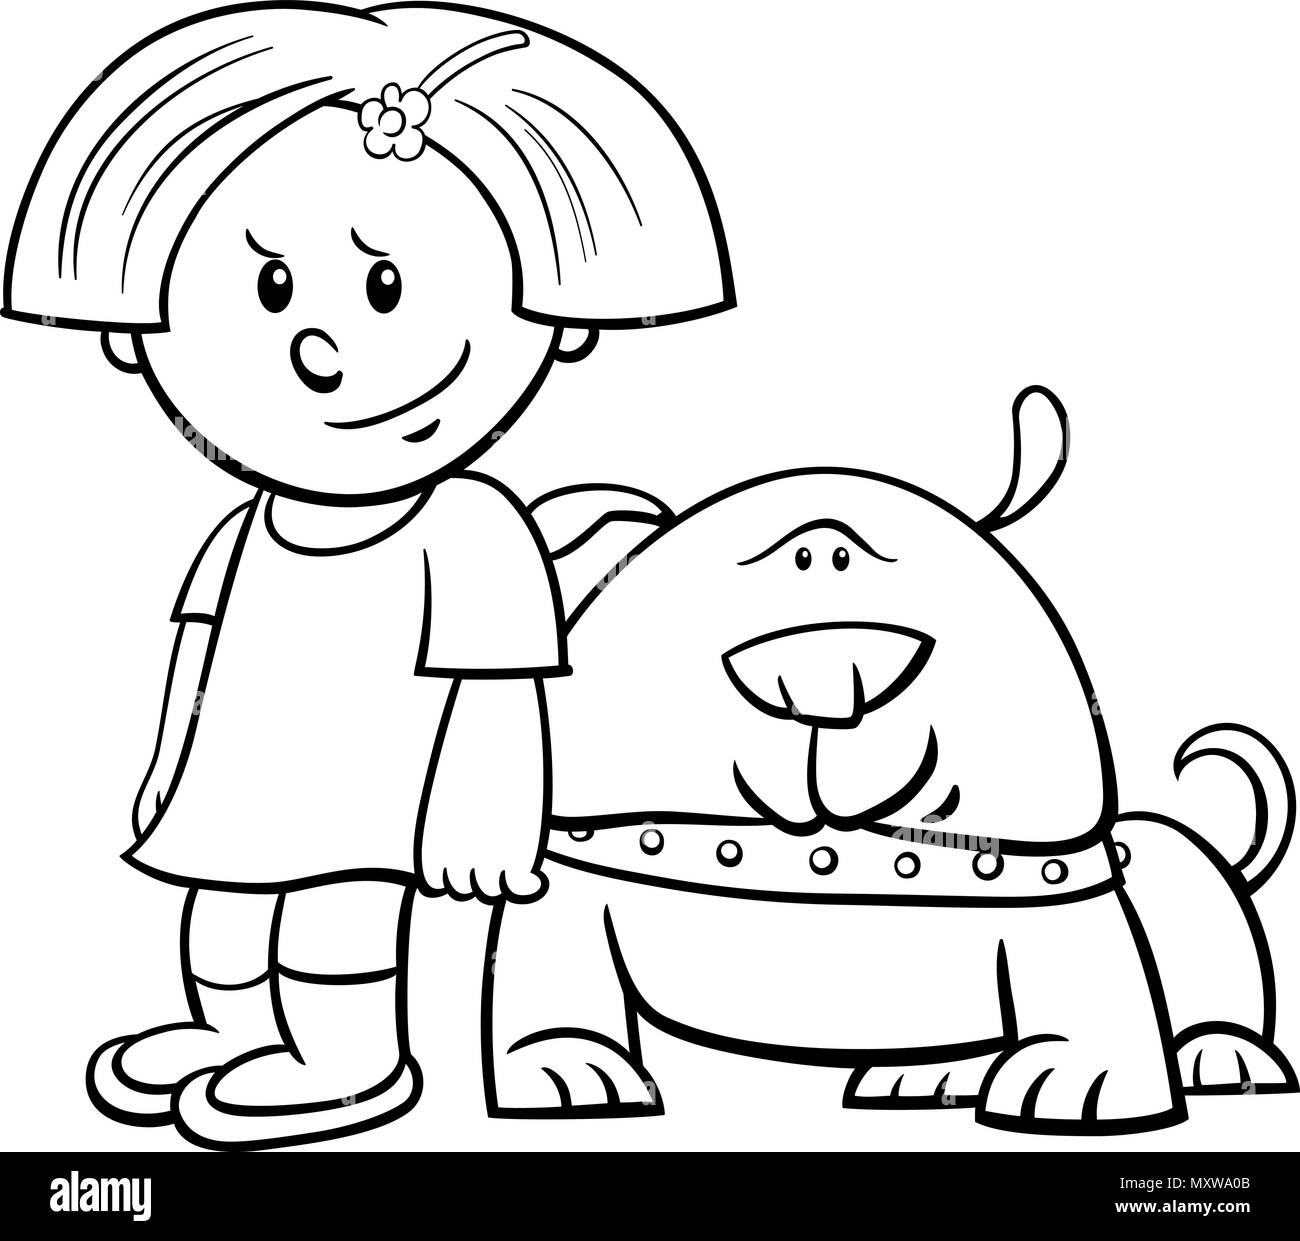 Black and White Cartoon Illustration of Cute Girl with Funny Dog Coloring Book Stock Vector